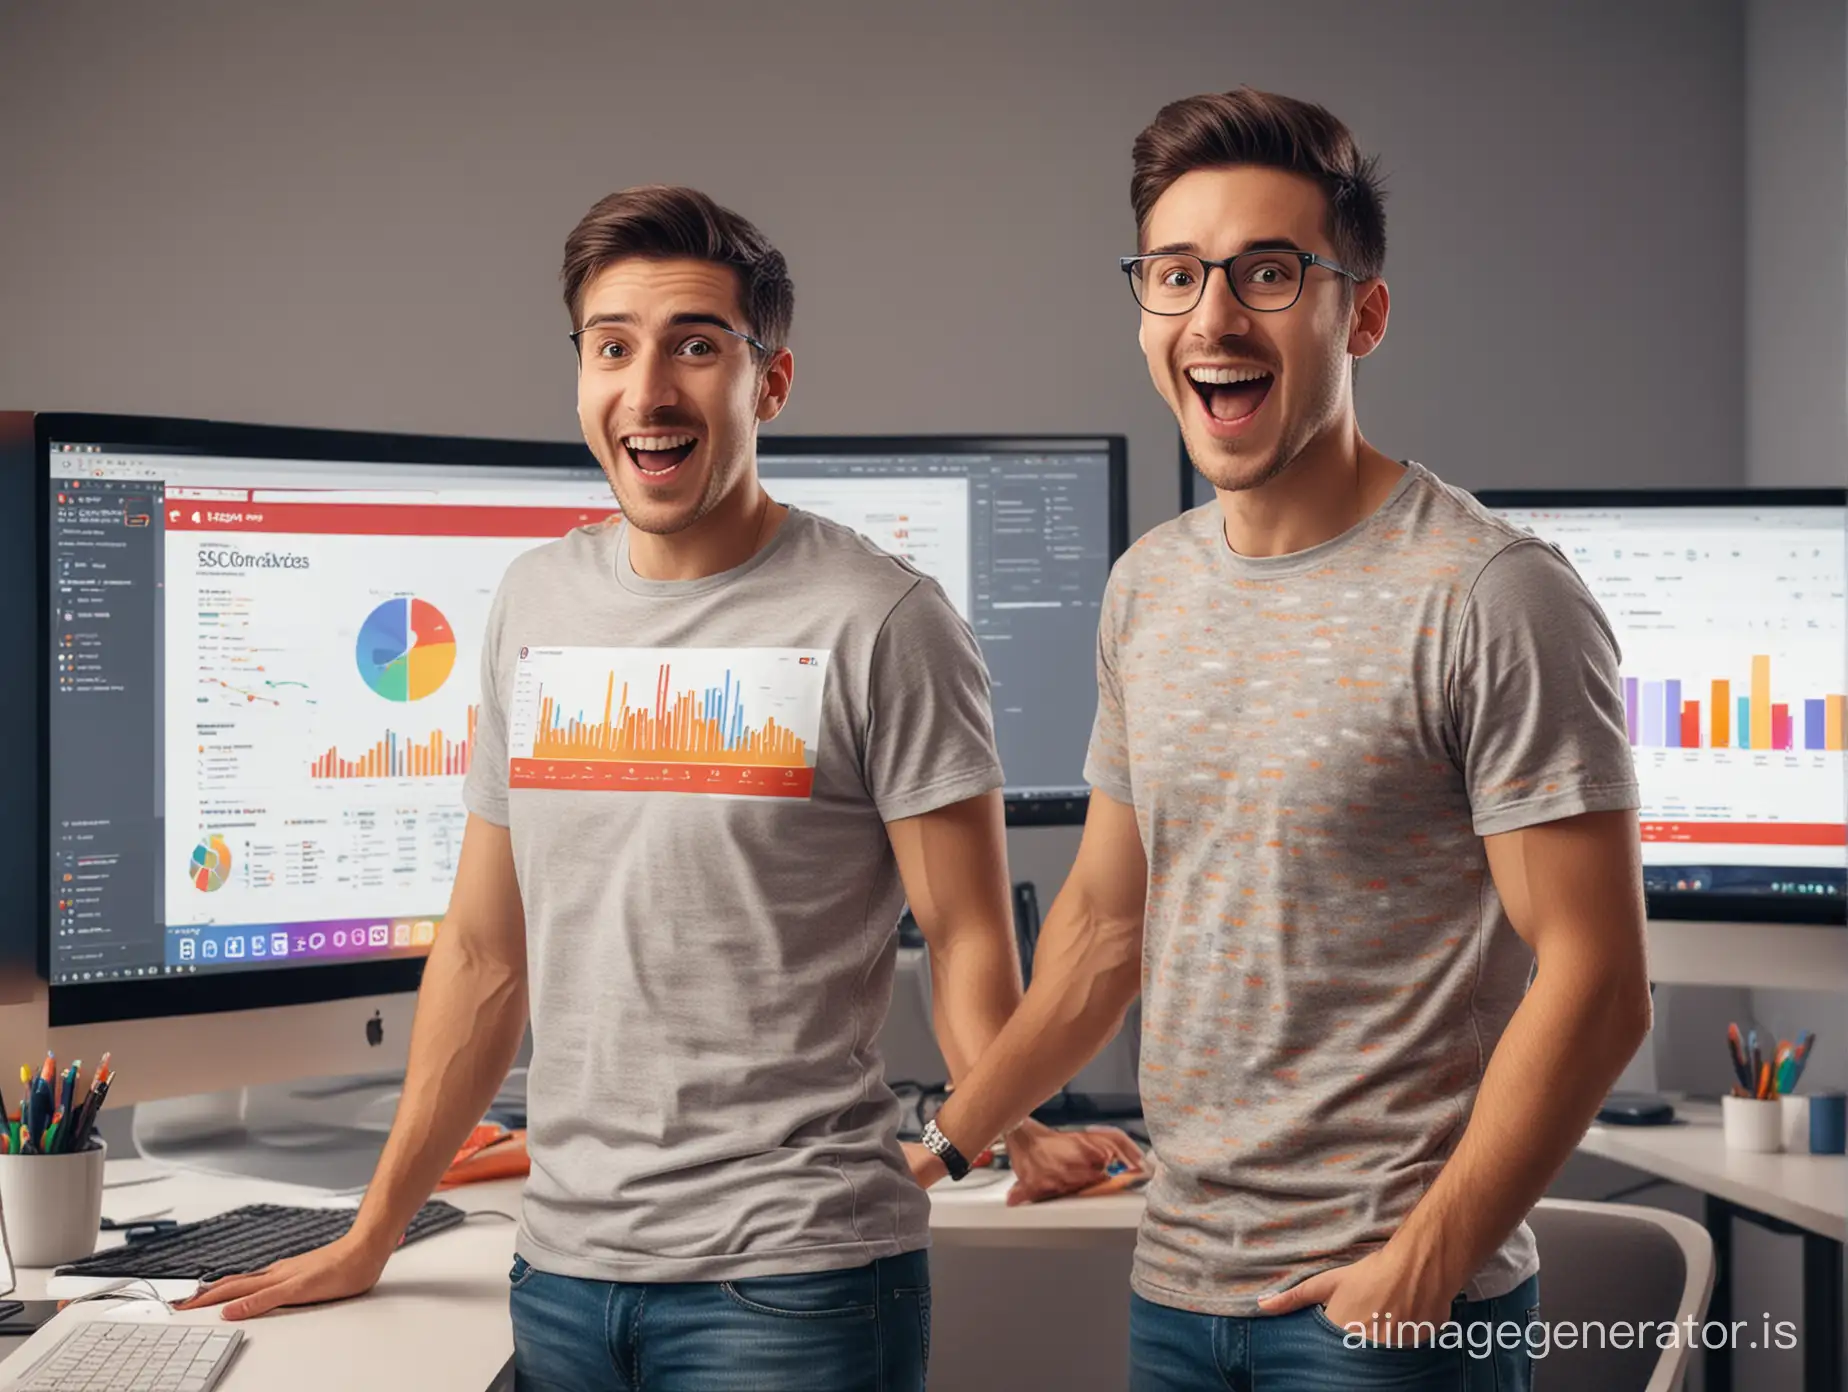 Create an image for a YouTube video thumbnail. The image should include a young, cheerful person wearing a casual T-shirt, looking excitedly at a large computer screen displaying colorful SEO analytics and statistics. The background is a modern office environment with soft lighting. The image should be vibrant and professional, with a style that conveys energy and approachability.